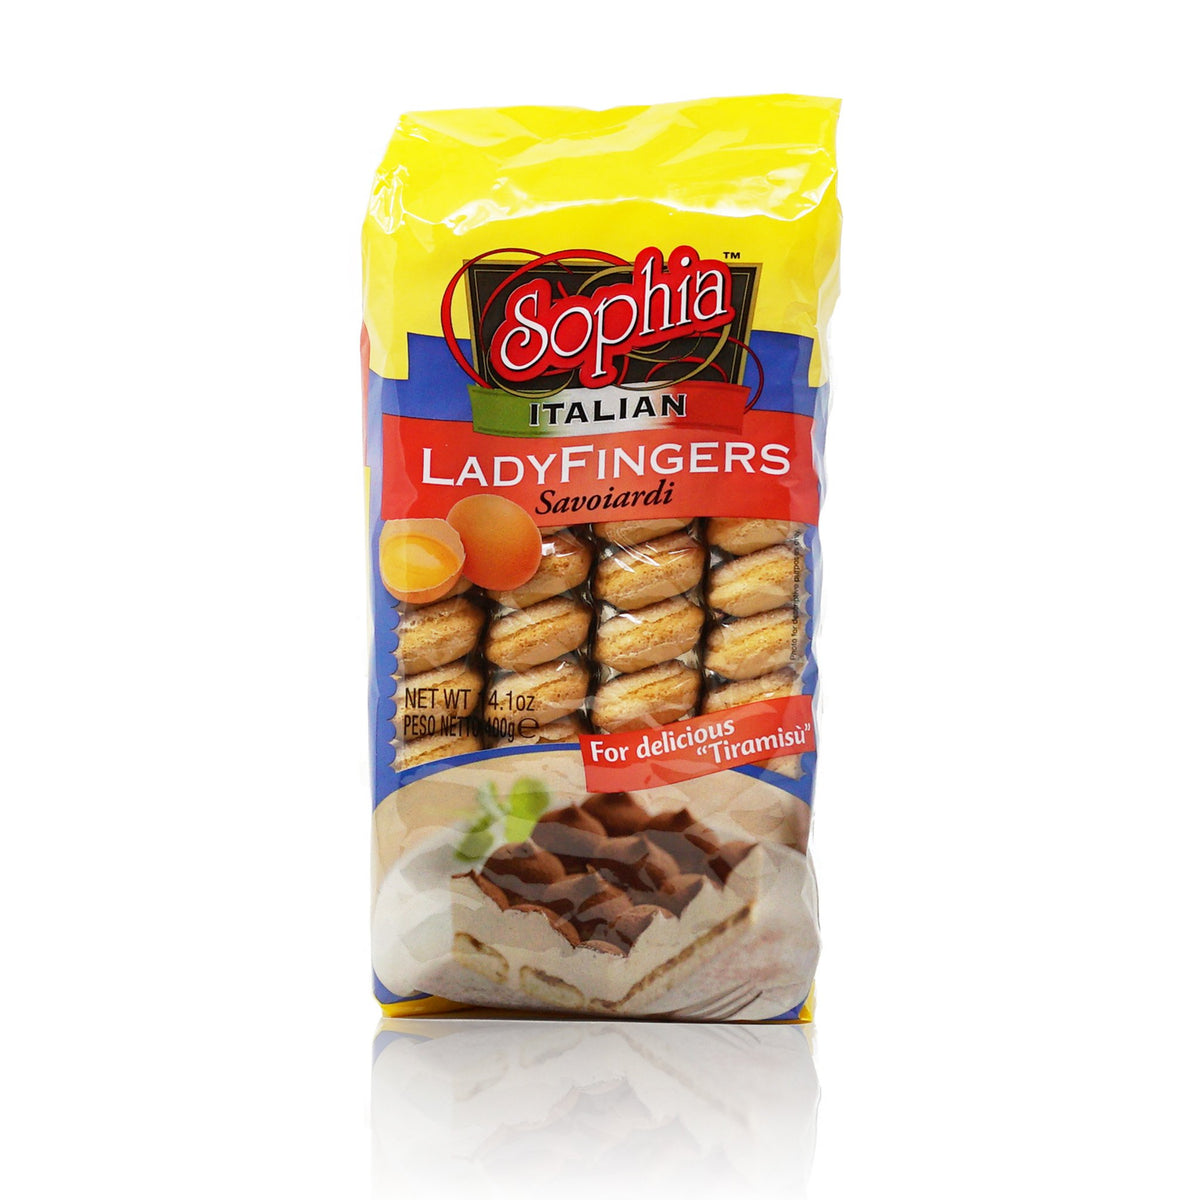 Sophia Lady Fingers "Savoiardi" from Italy- Family Pack 14oz-4 pack